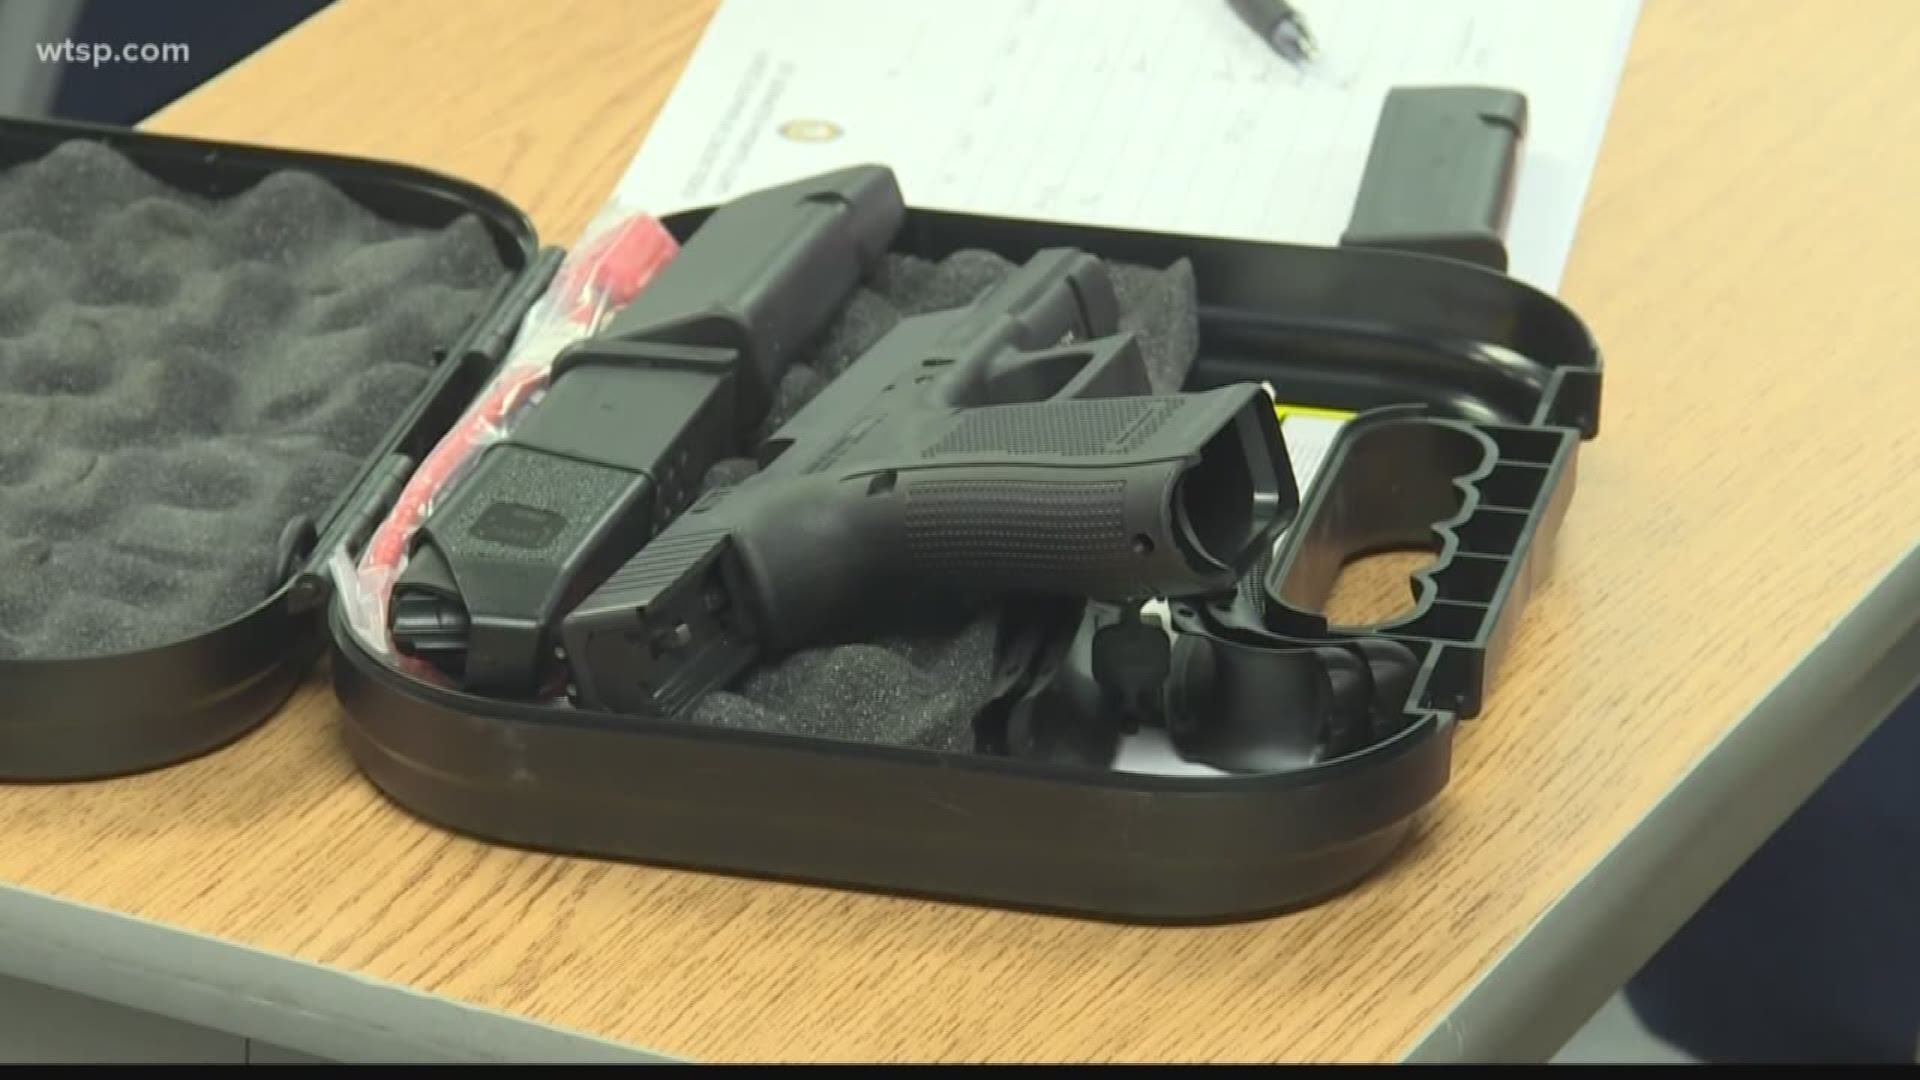 The Guardian Program allows teachers, other school employees or security guards to have guns on campus in case of an emergency.